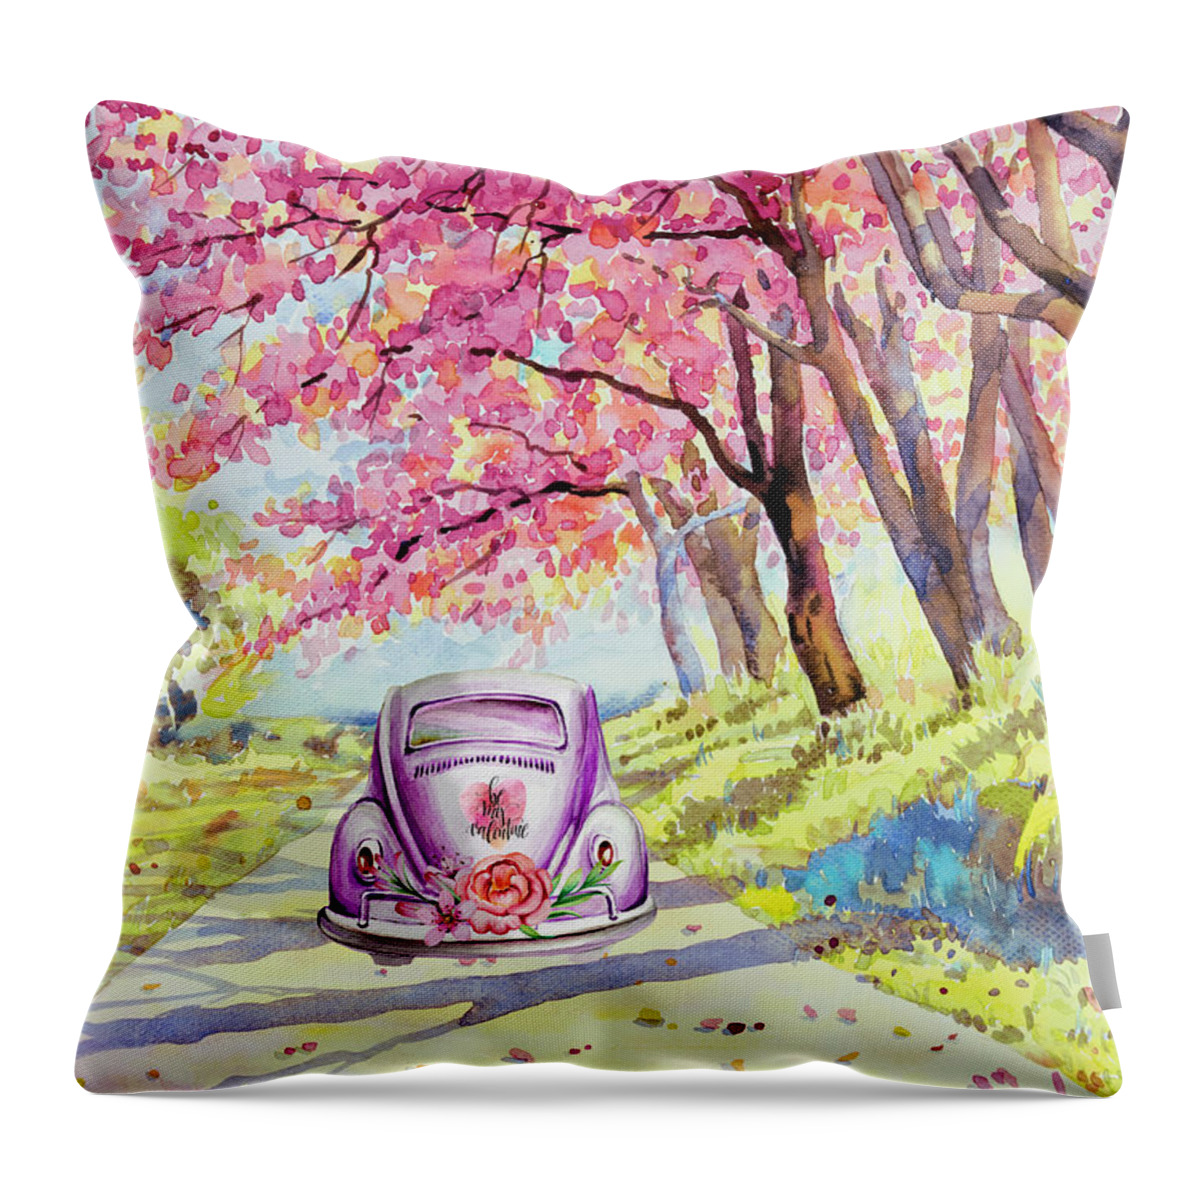 Watercolor Throw Pillow featuring the painting Be My Valentine 02 by Miki De Goodaboom